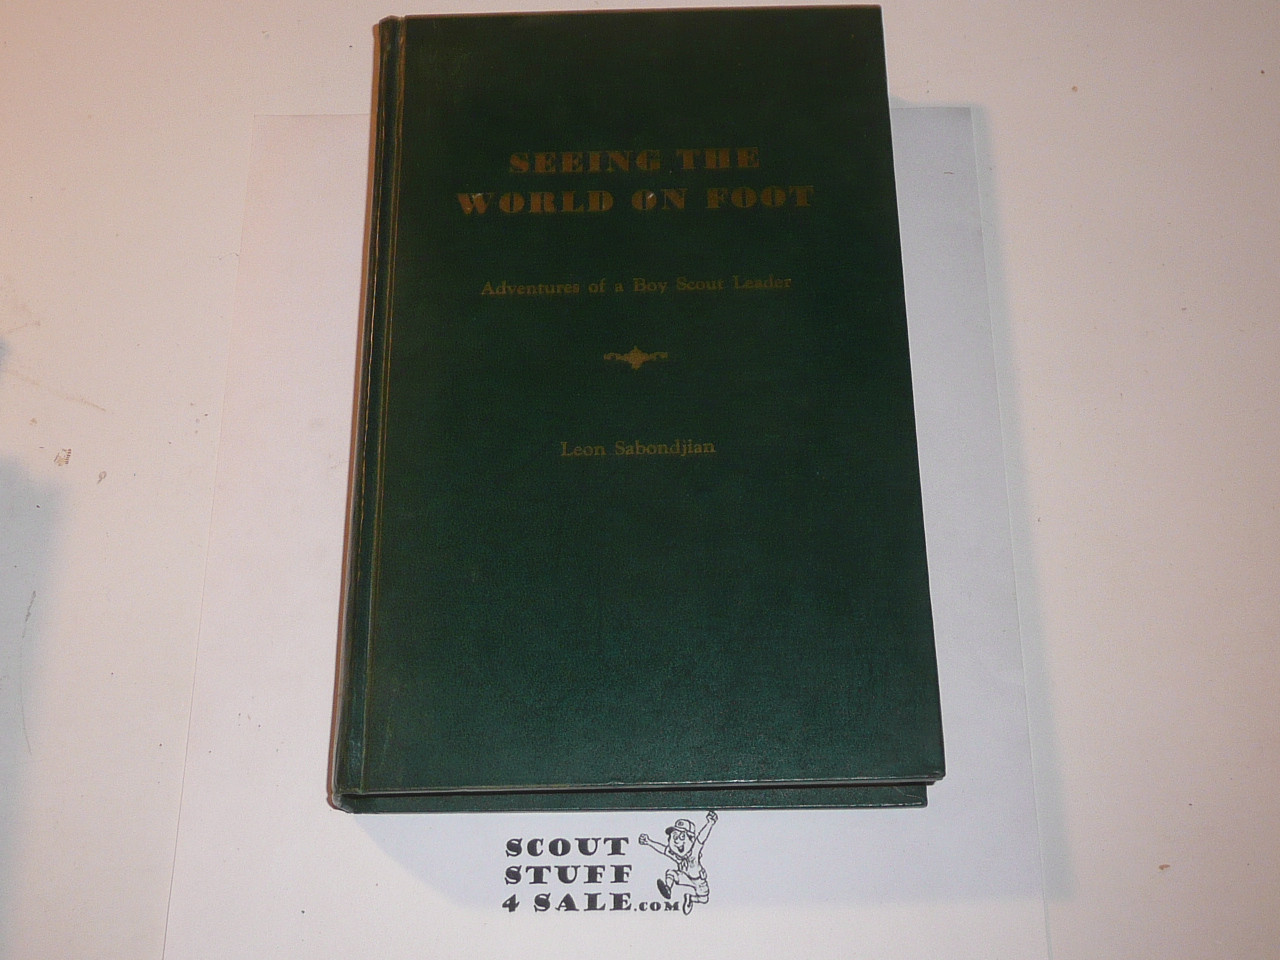 Seeing the World on Foot, Adventures of a Boy Scout Leader, by Leon Sabondjian, signed by author, 1967